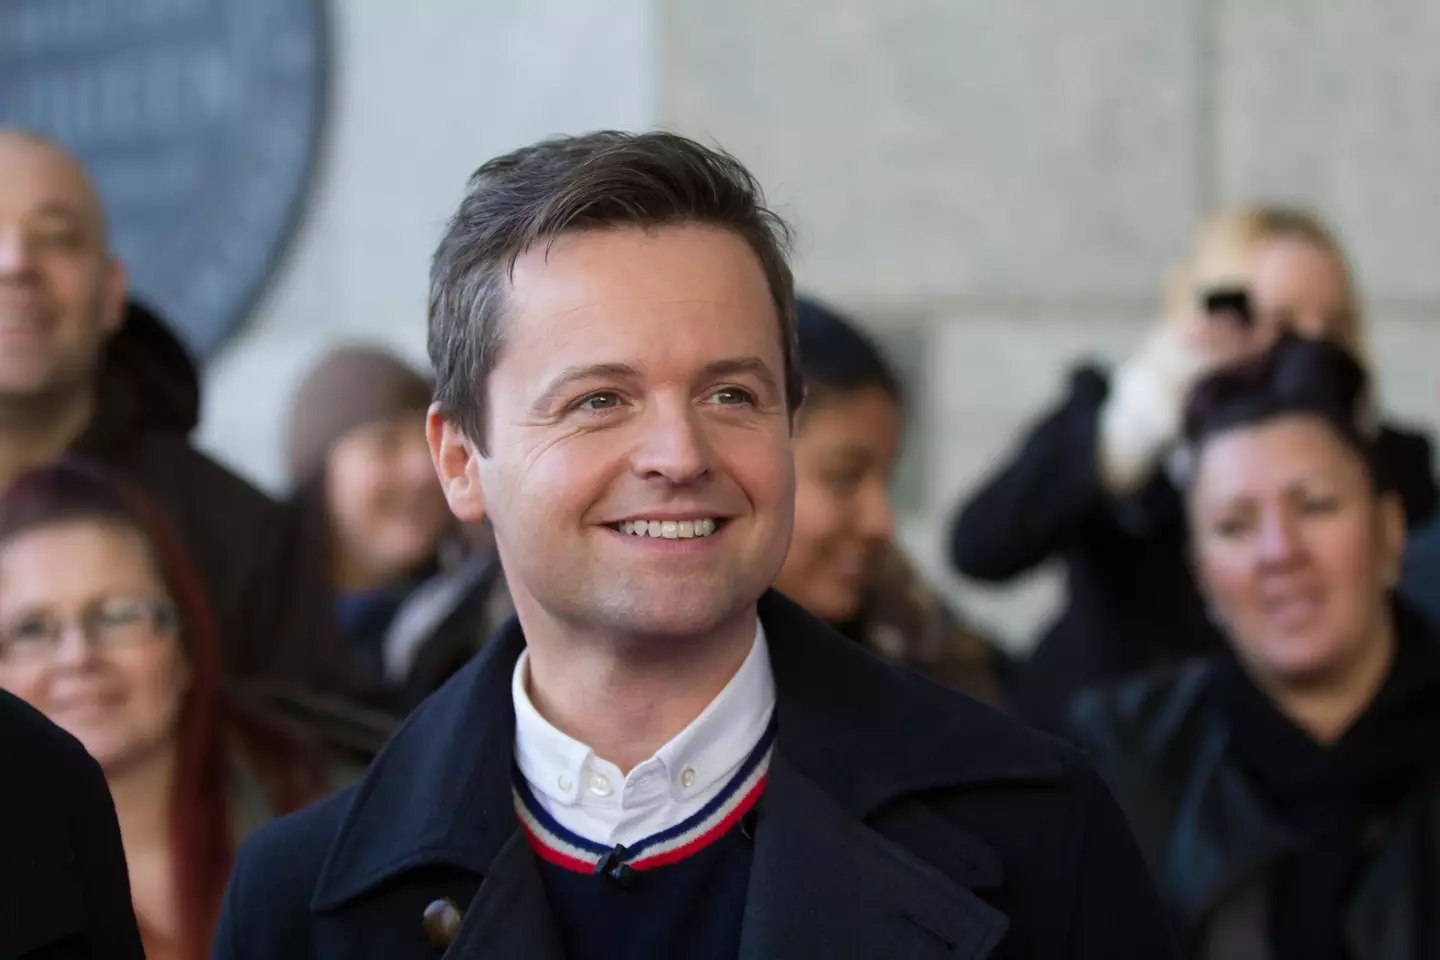 Declan Donnelly said he is 'heartbroken' at the news.